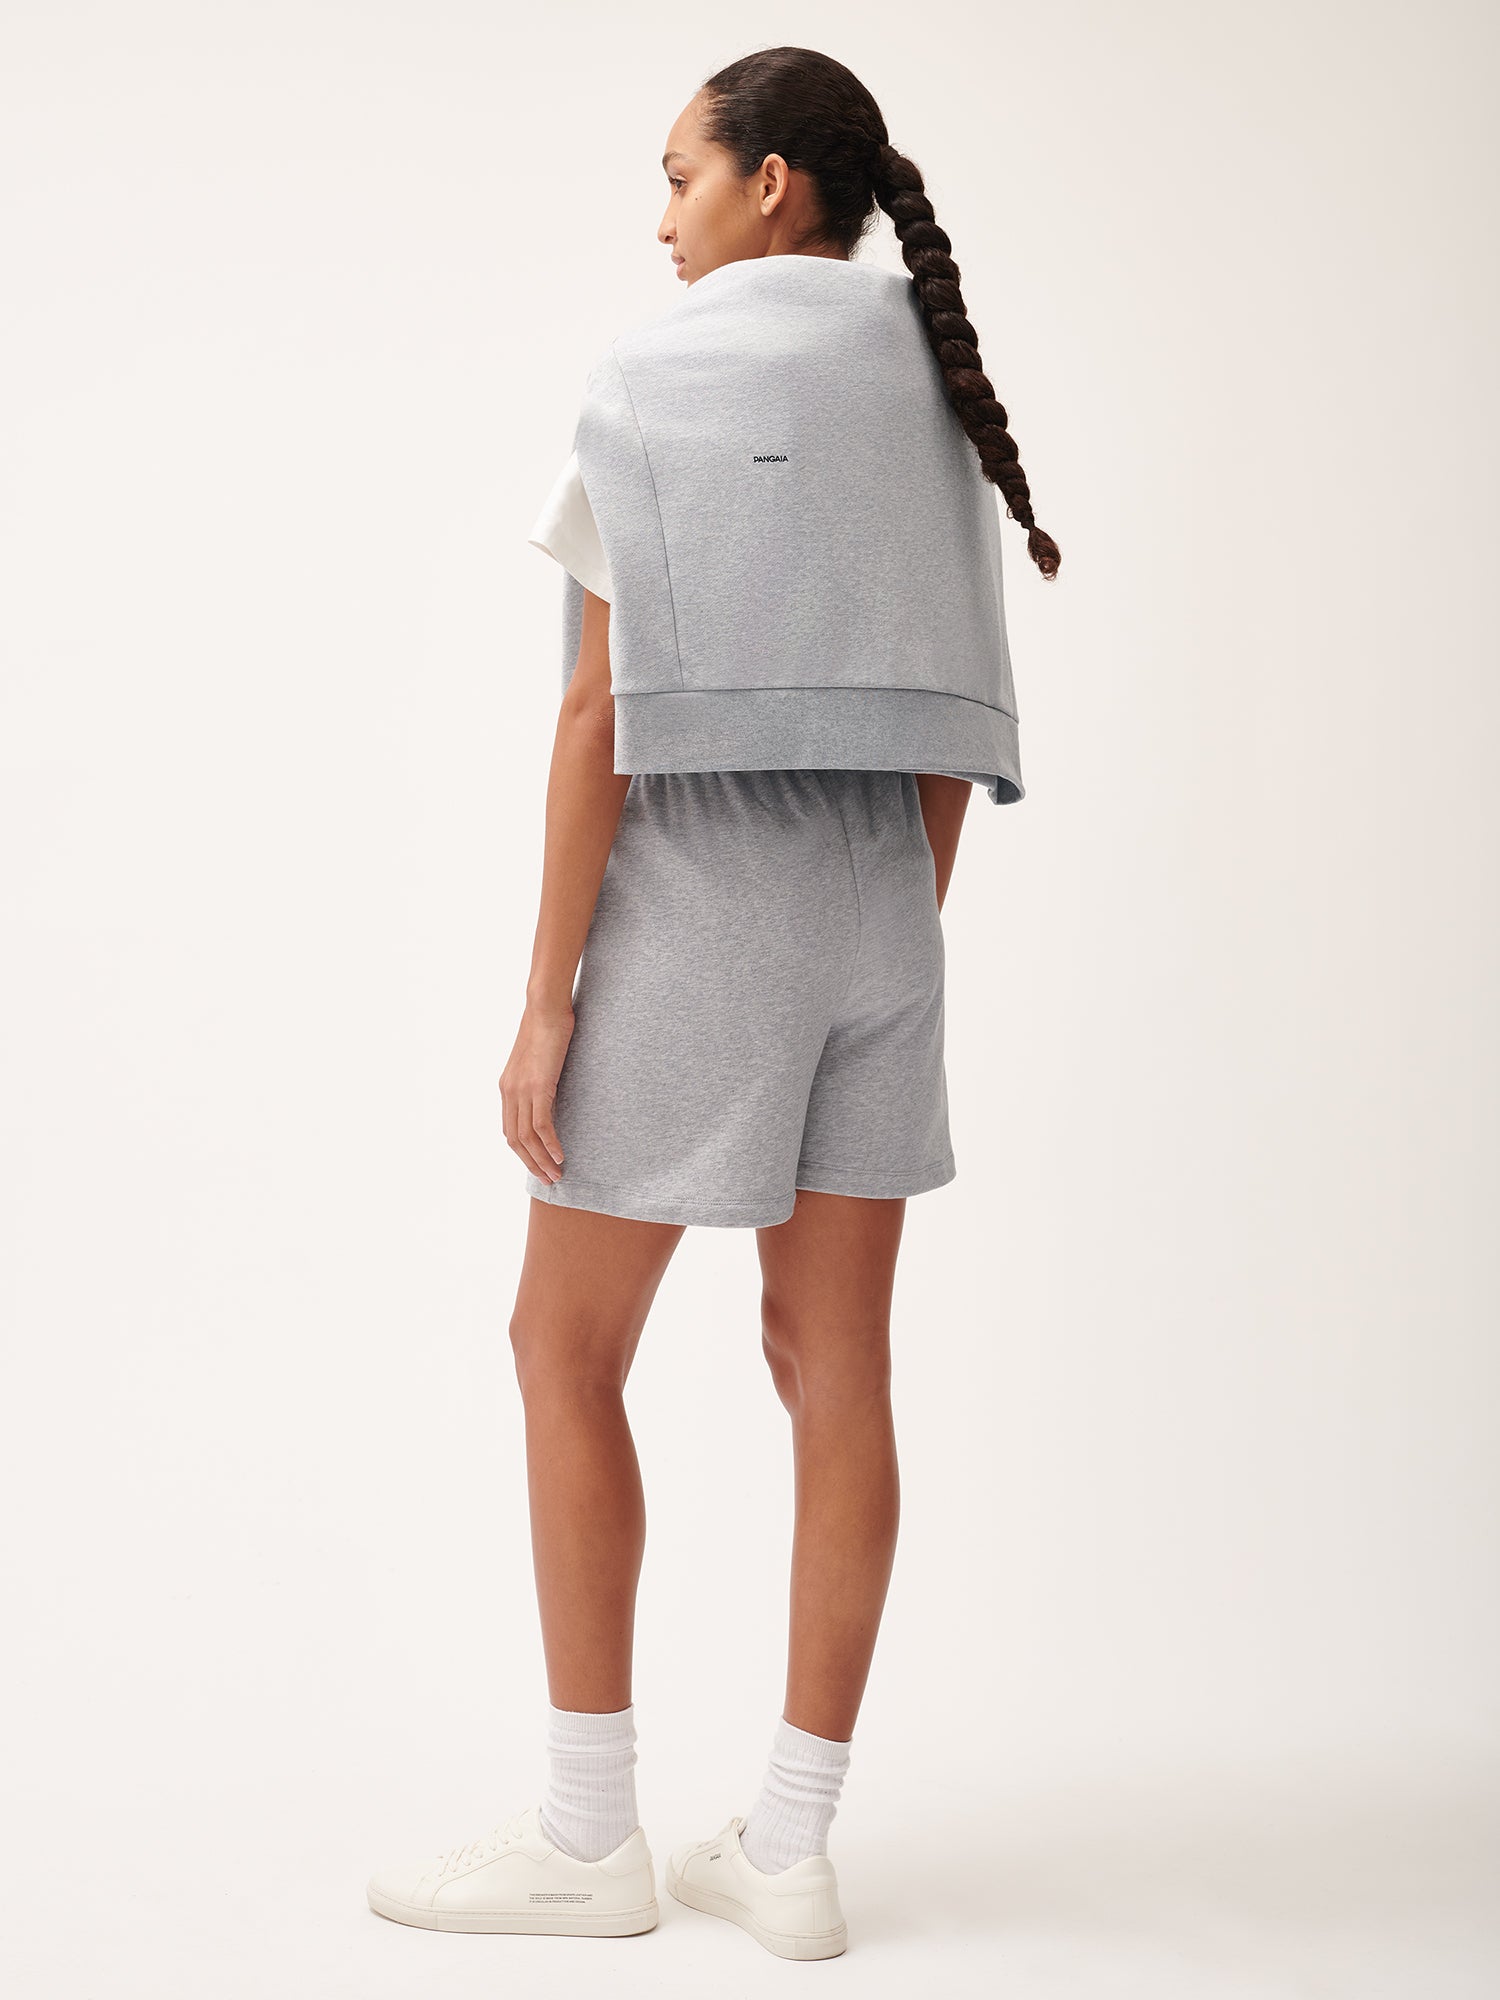 365_Midweight_Mid_Length_Shorts_Grey_Marl_female-2